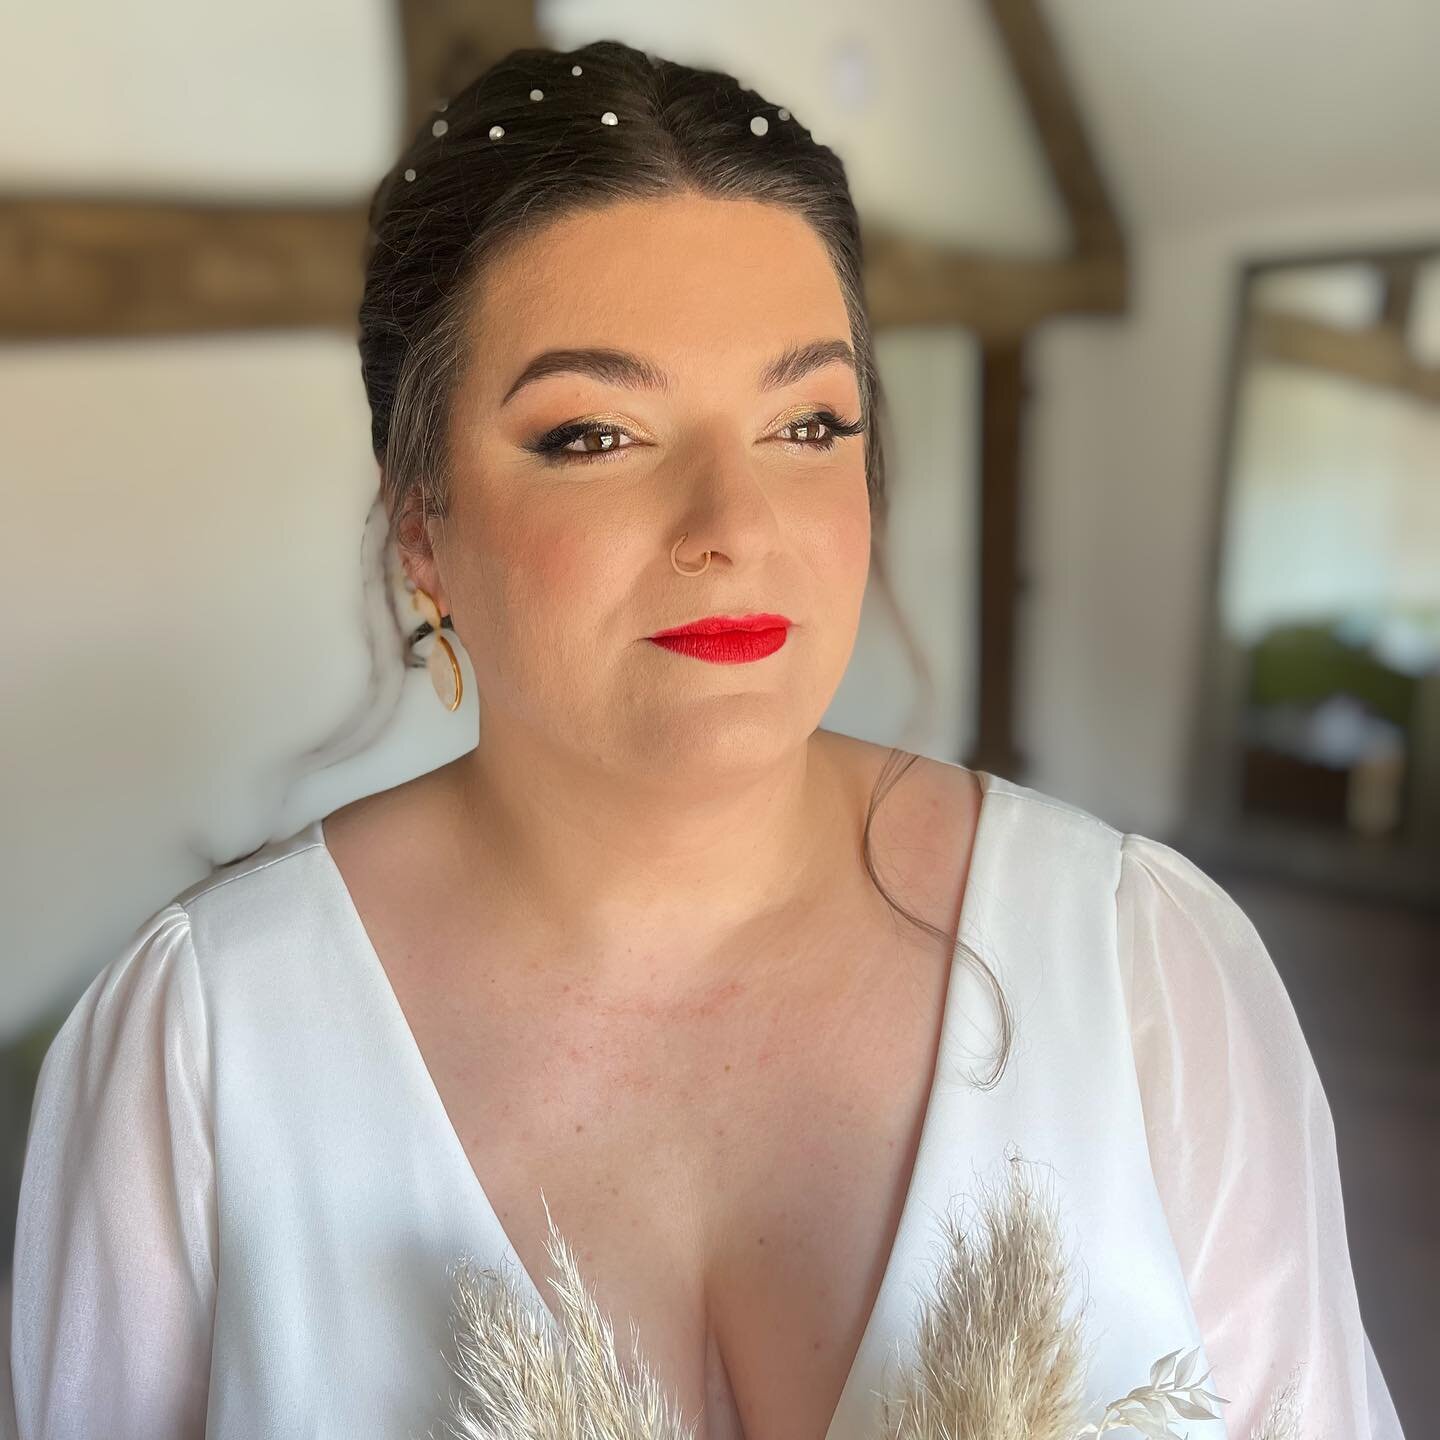 //CIARA//

What a dream, I loved creating this glam makeup look and updo and I just loved the whole look Ciara went for! 

#mua #makeup #makeupartist #bride #bridalmakeup #redlip #hair #hairstyling #bridalhair #pearls #bride #wedding #weddingday